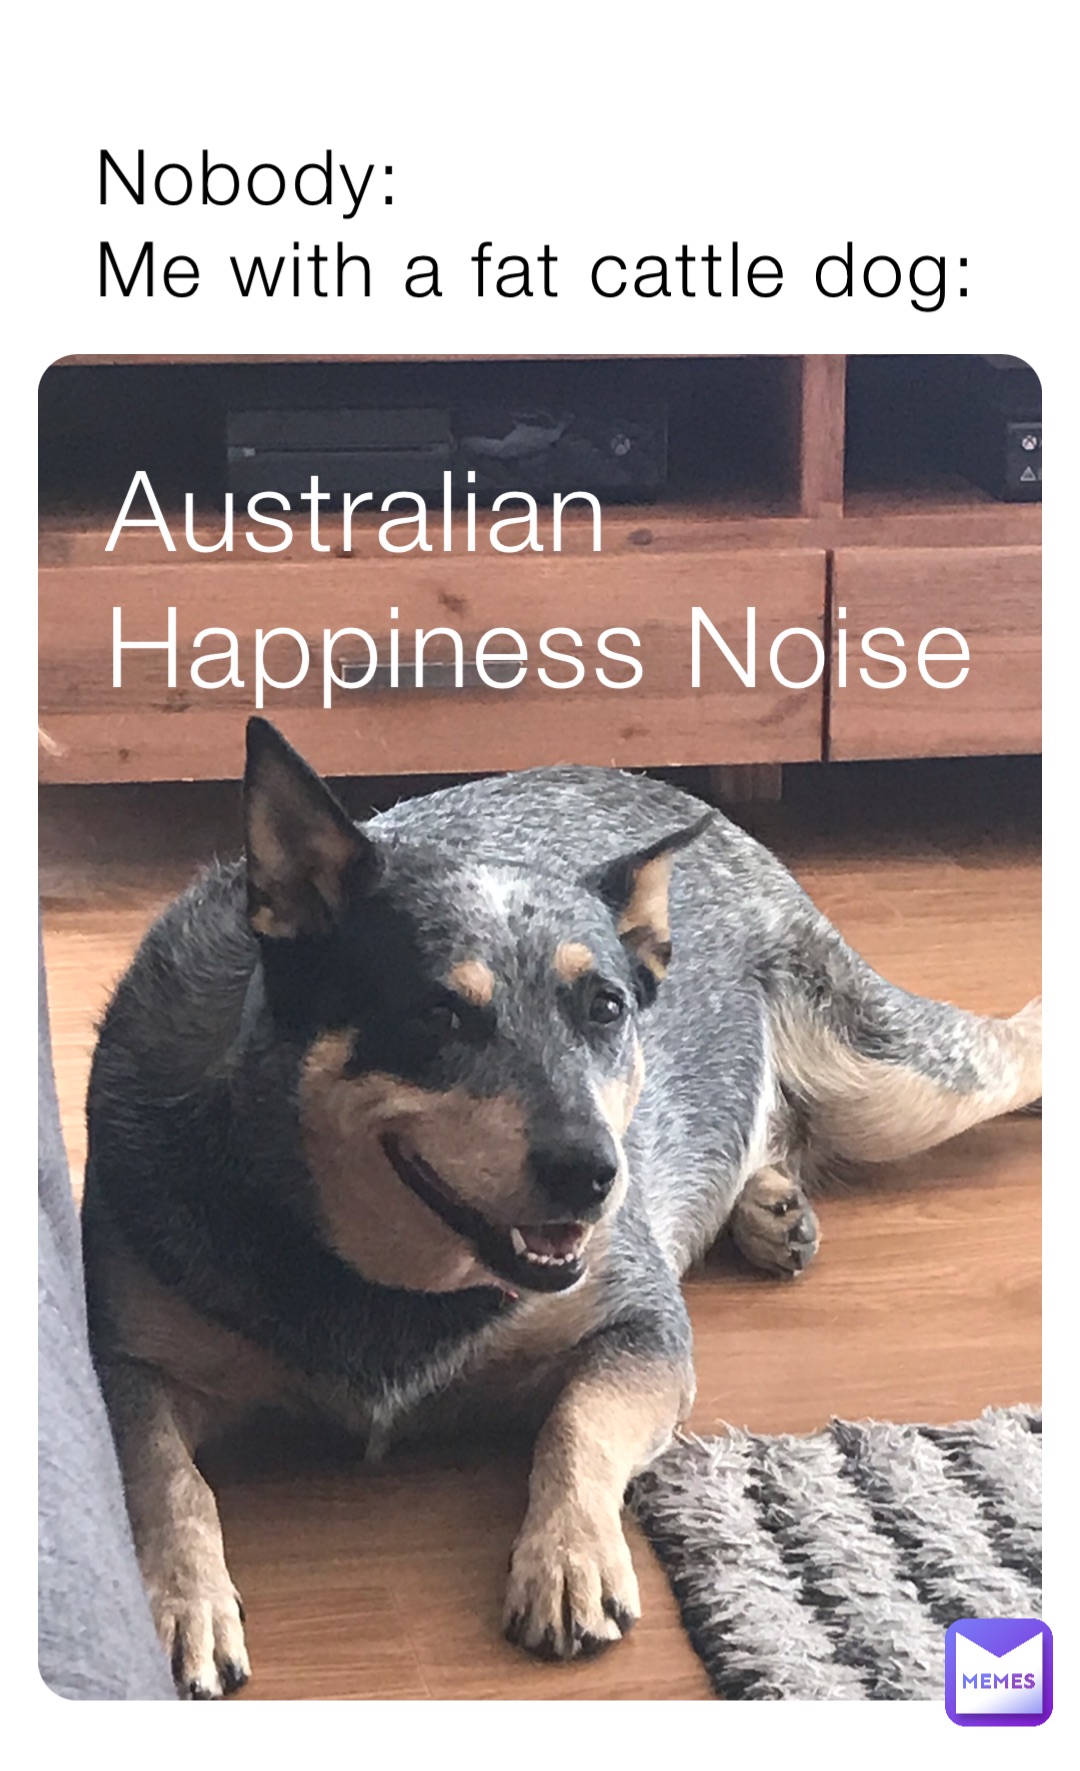 Nobody:
Me with a fat cattle dog: Australian Happiness Noise